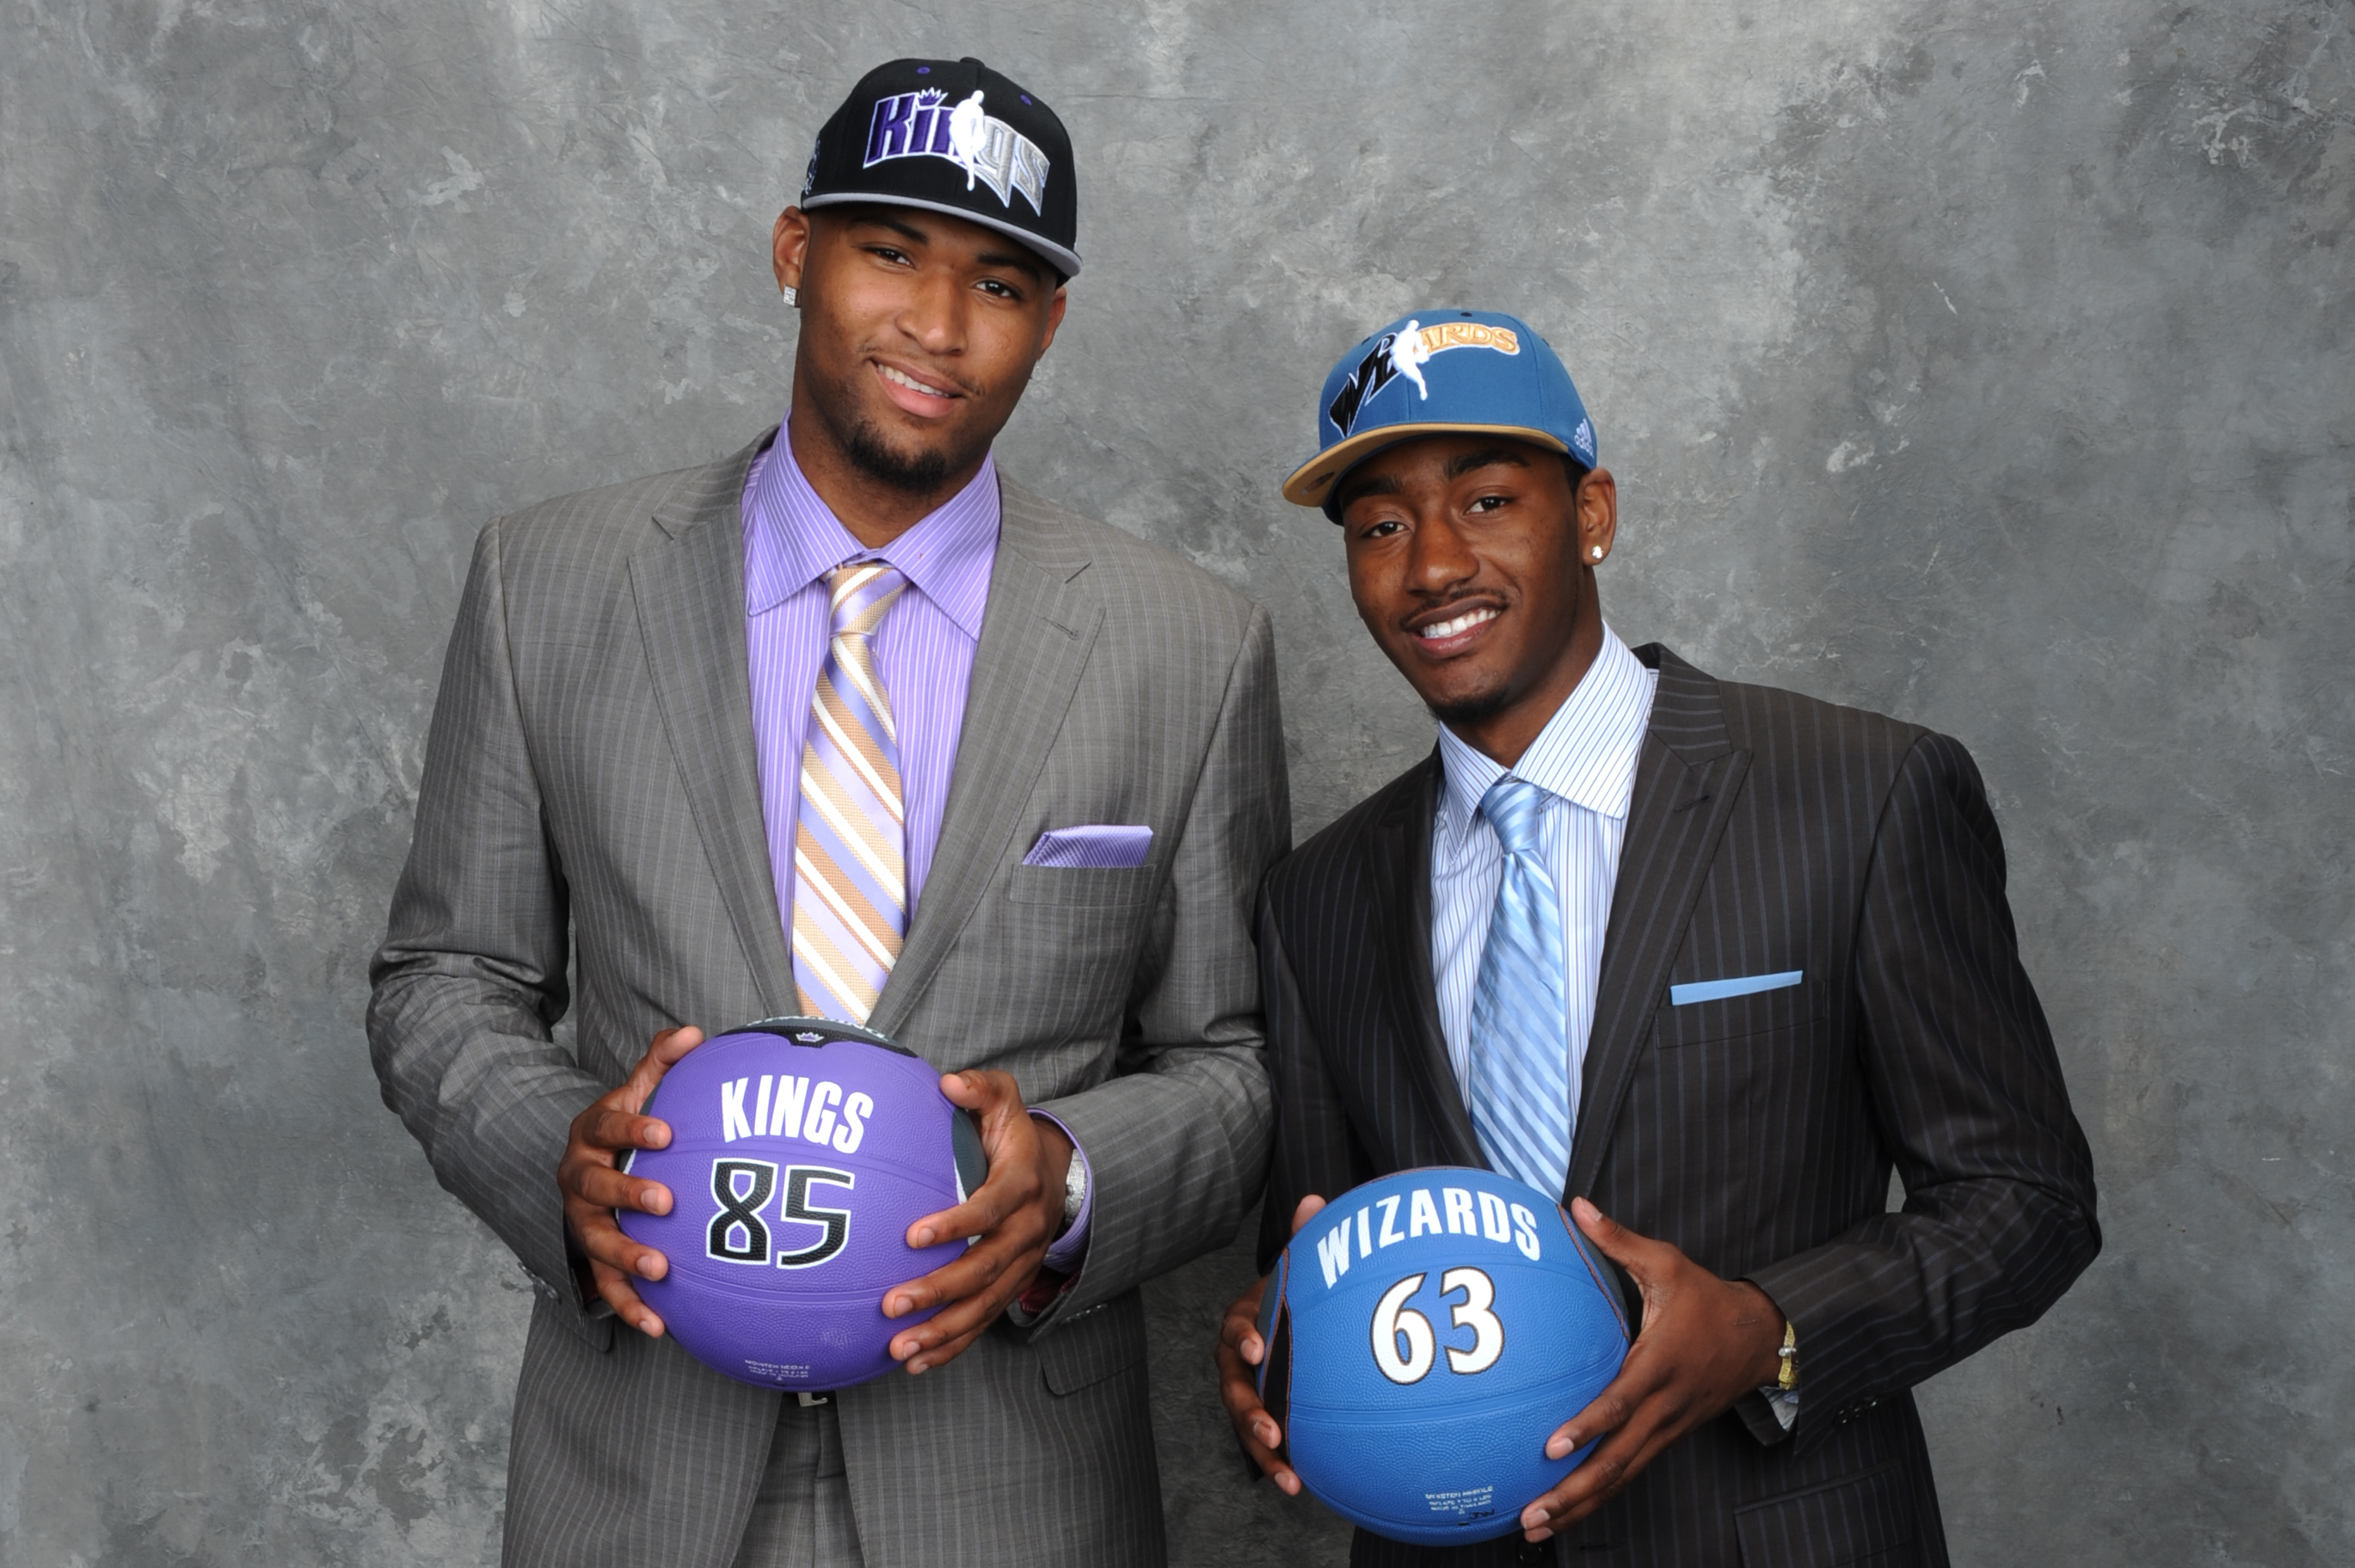 2010 NBA re-draft: The way it should have been